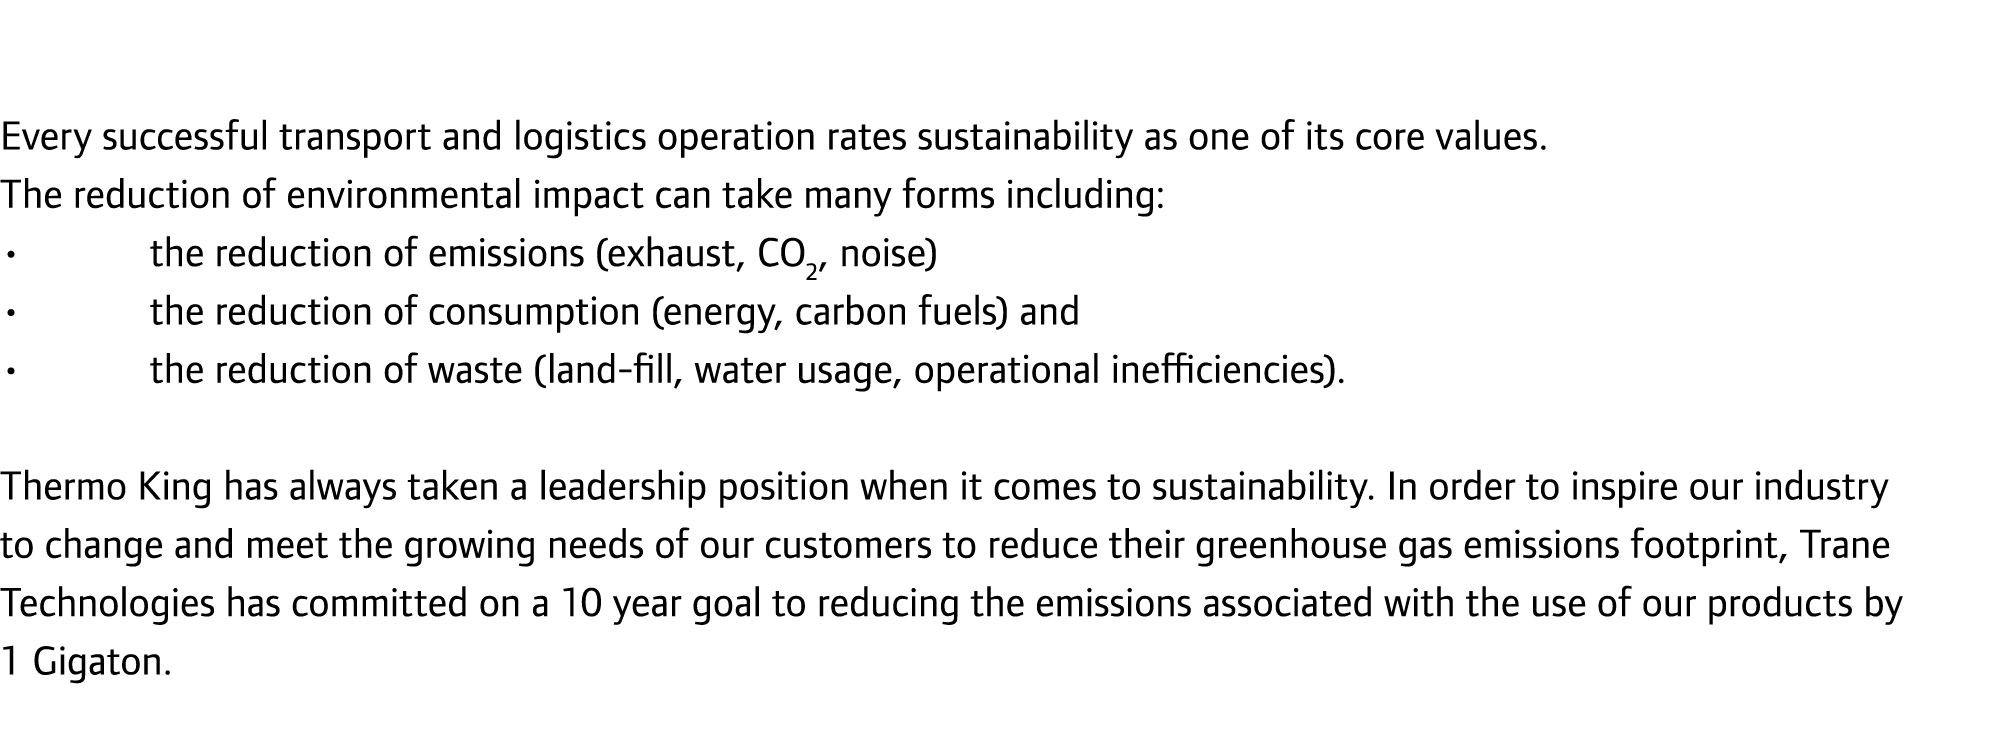 Every successful transport and logistics operation rates sustainability as one of its core values. The reduction of e...